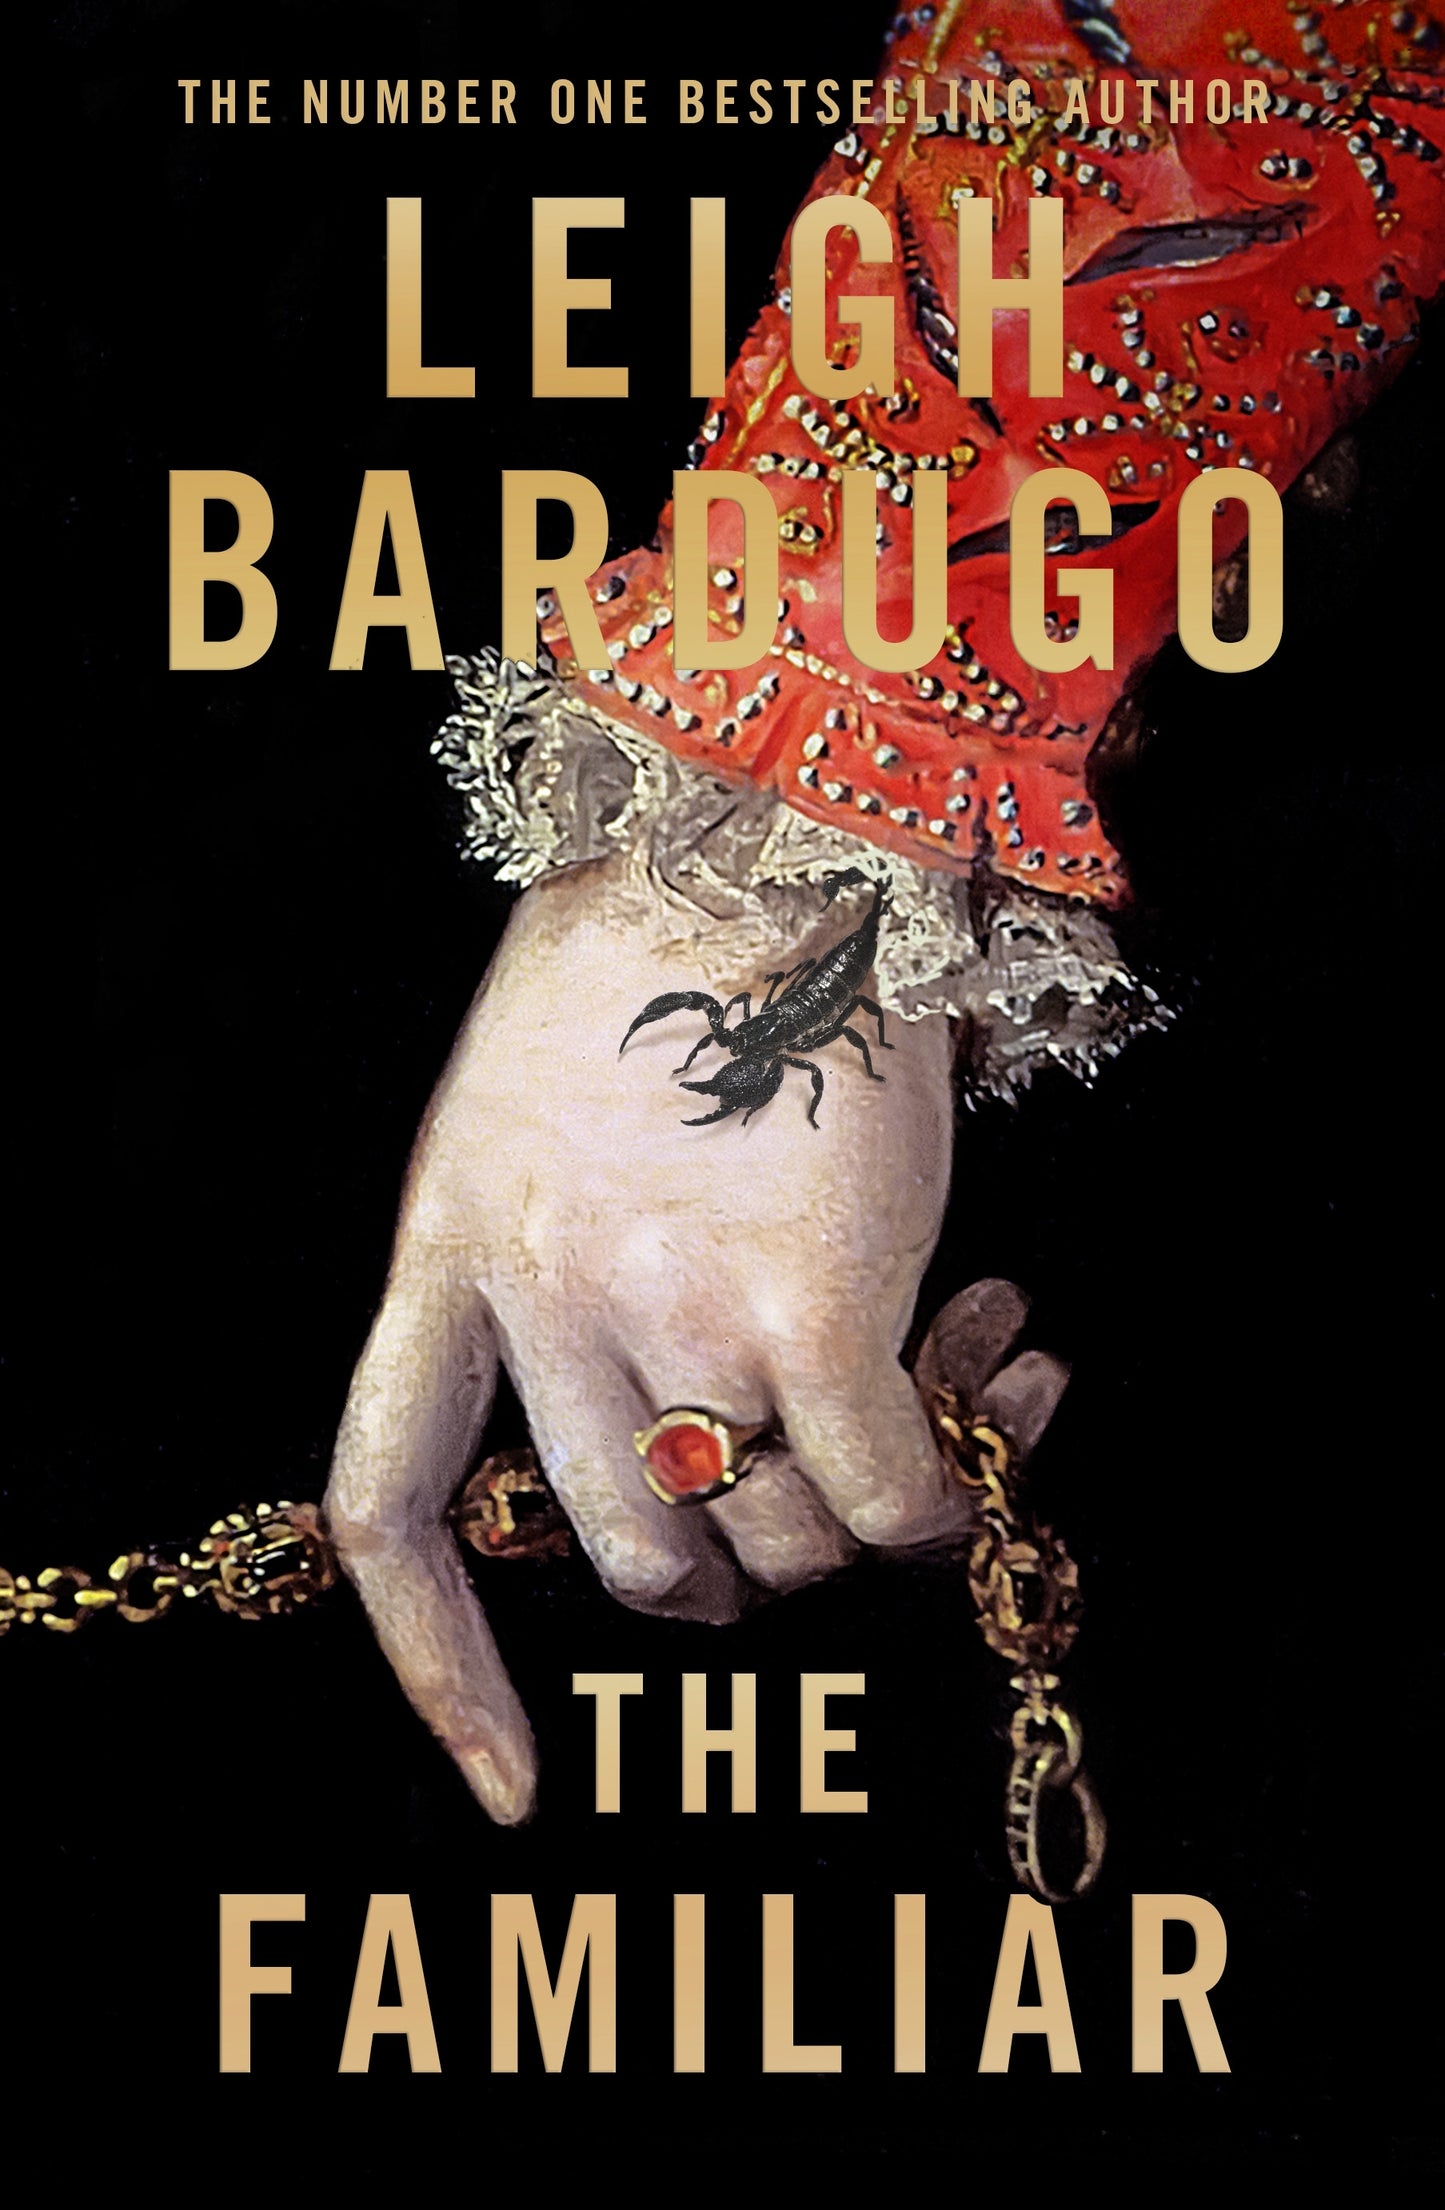 The Familiar by Leigh Bardugo at BIBLIONEPAL Bookstore